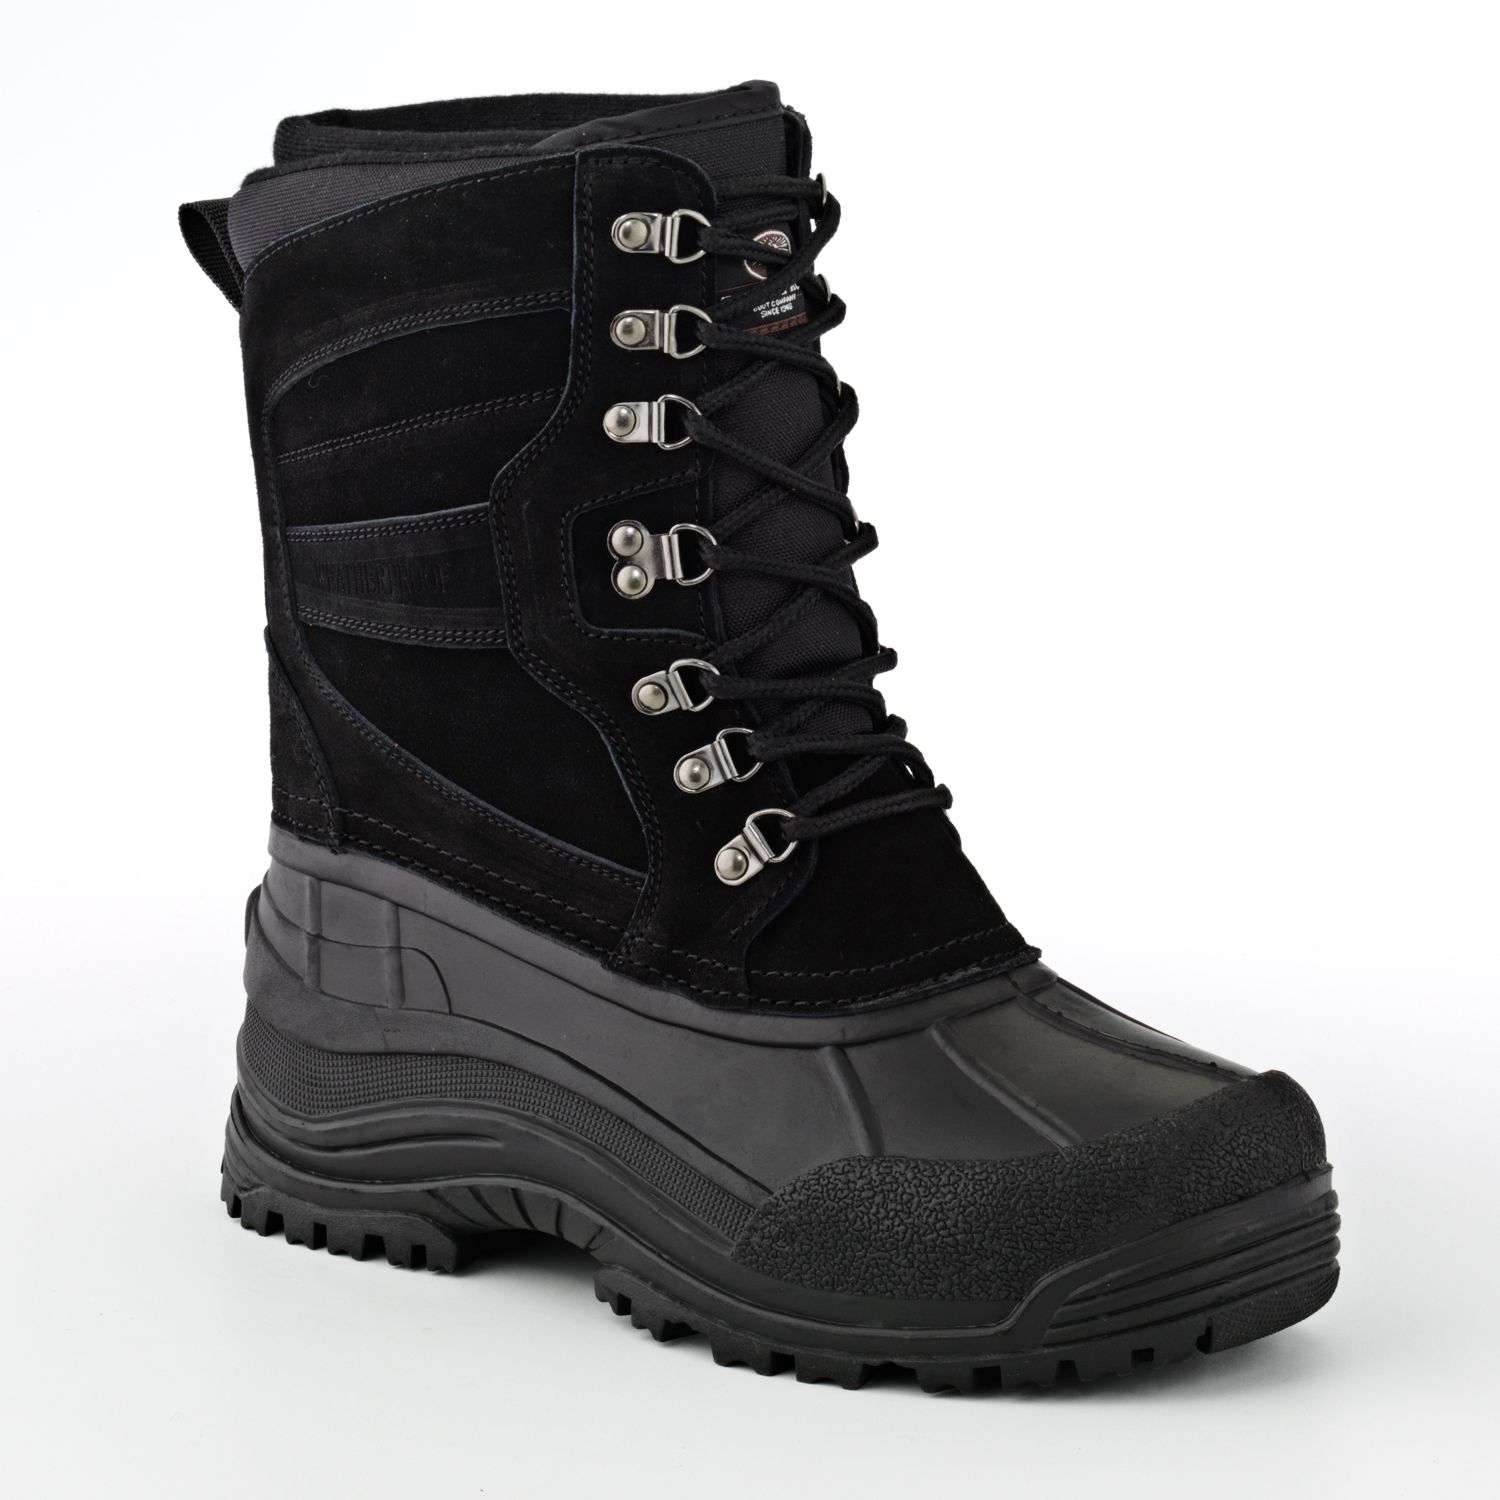 Therma™Storm Winter Boots - Men